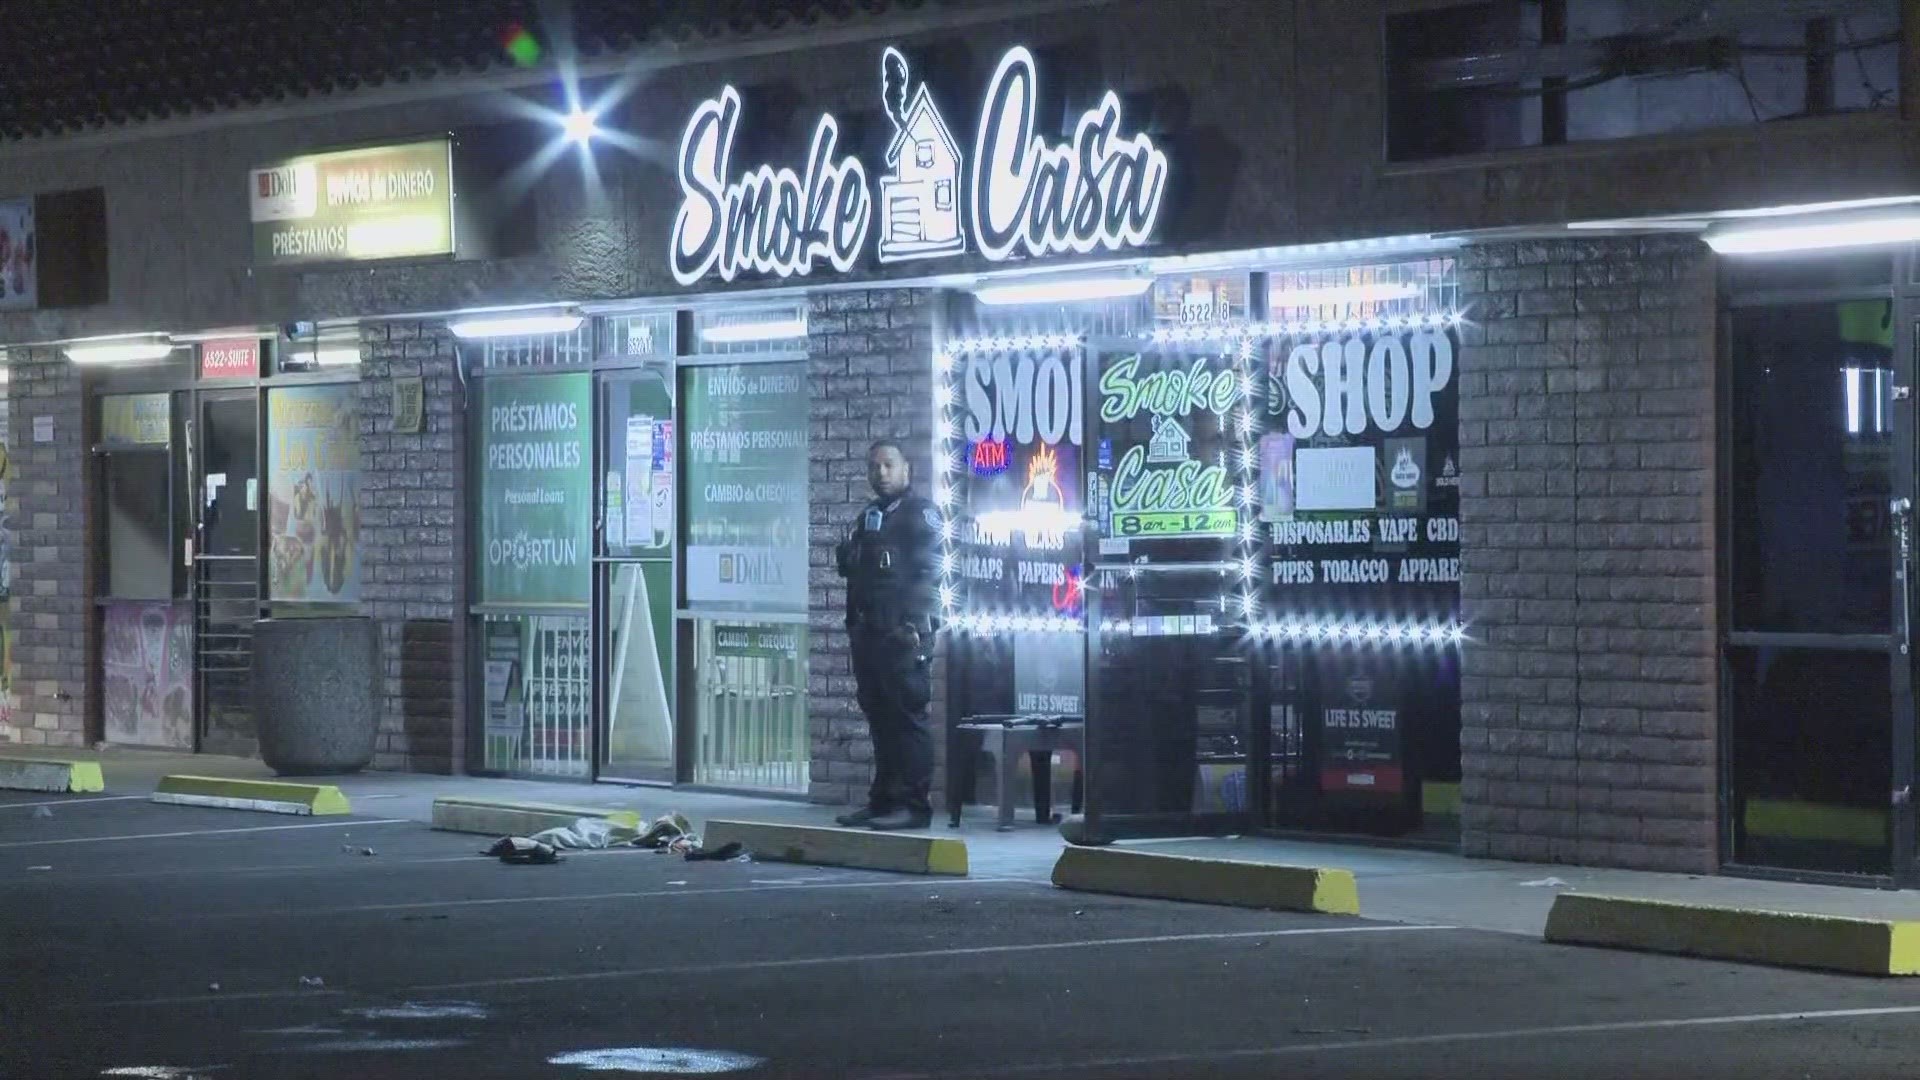 A shooting at a Glendale smoke shop sent one person to the hospital. Jen Wahl has the initial details.